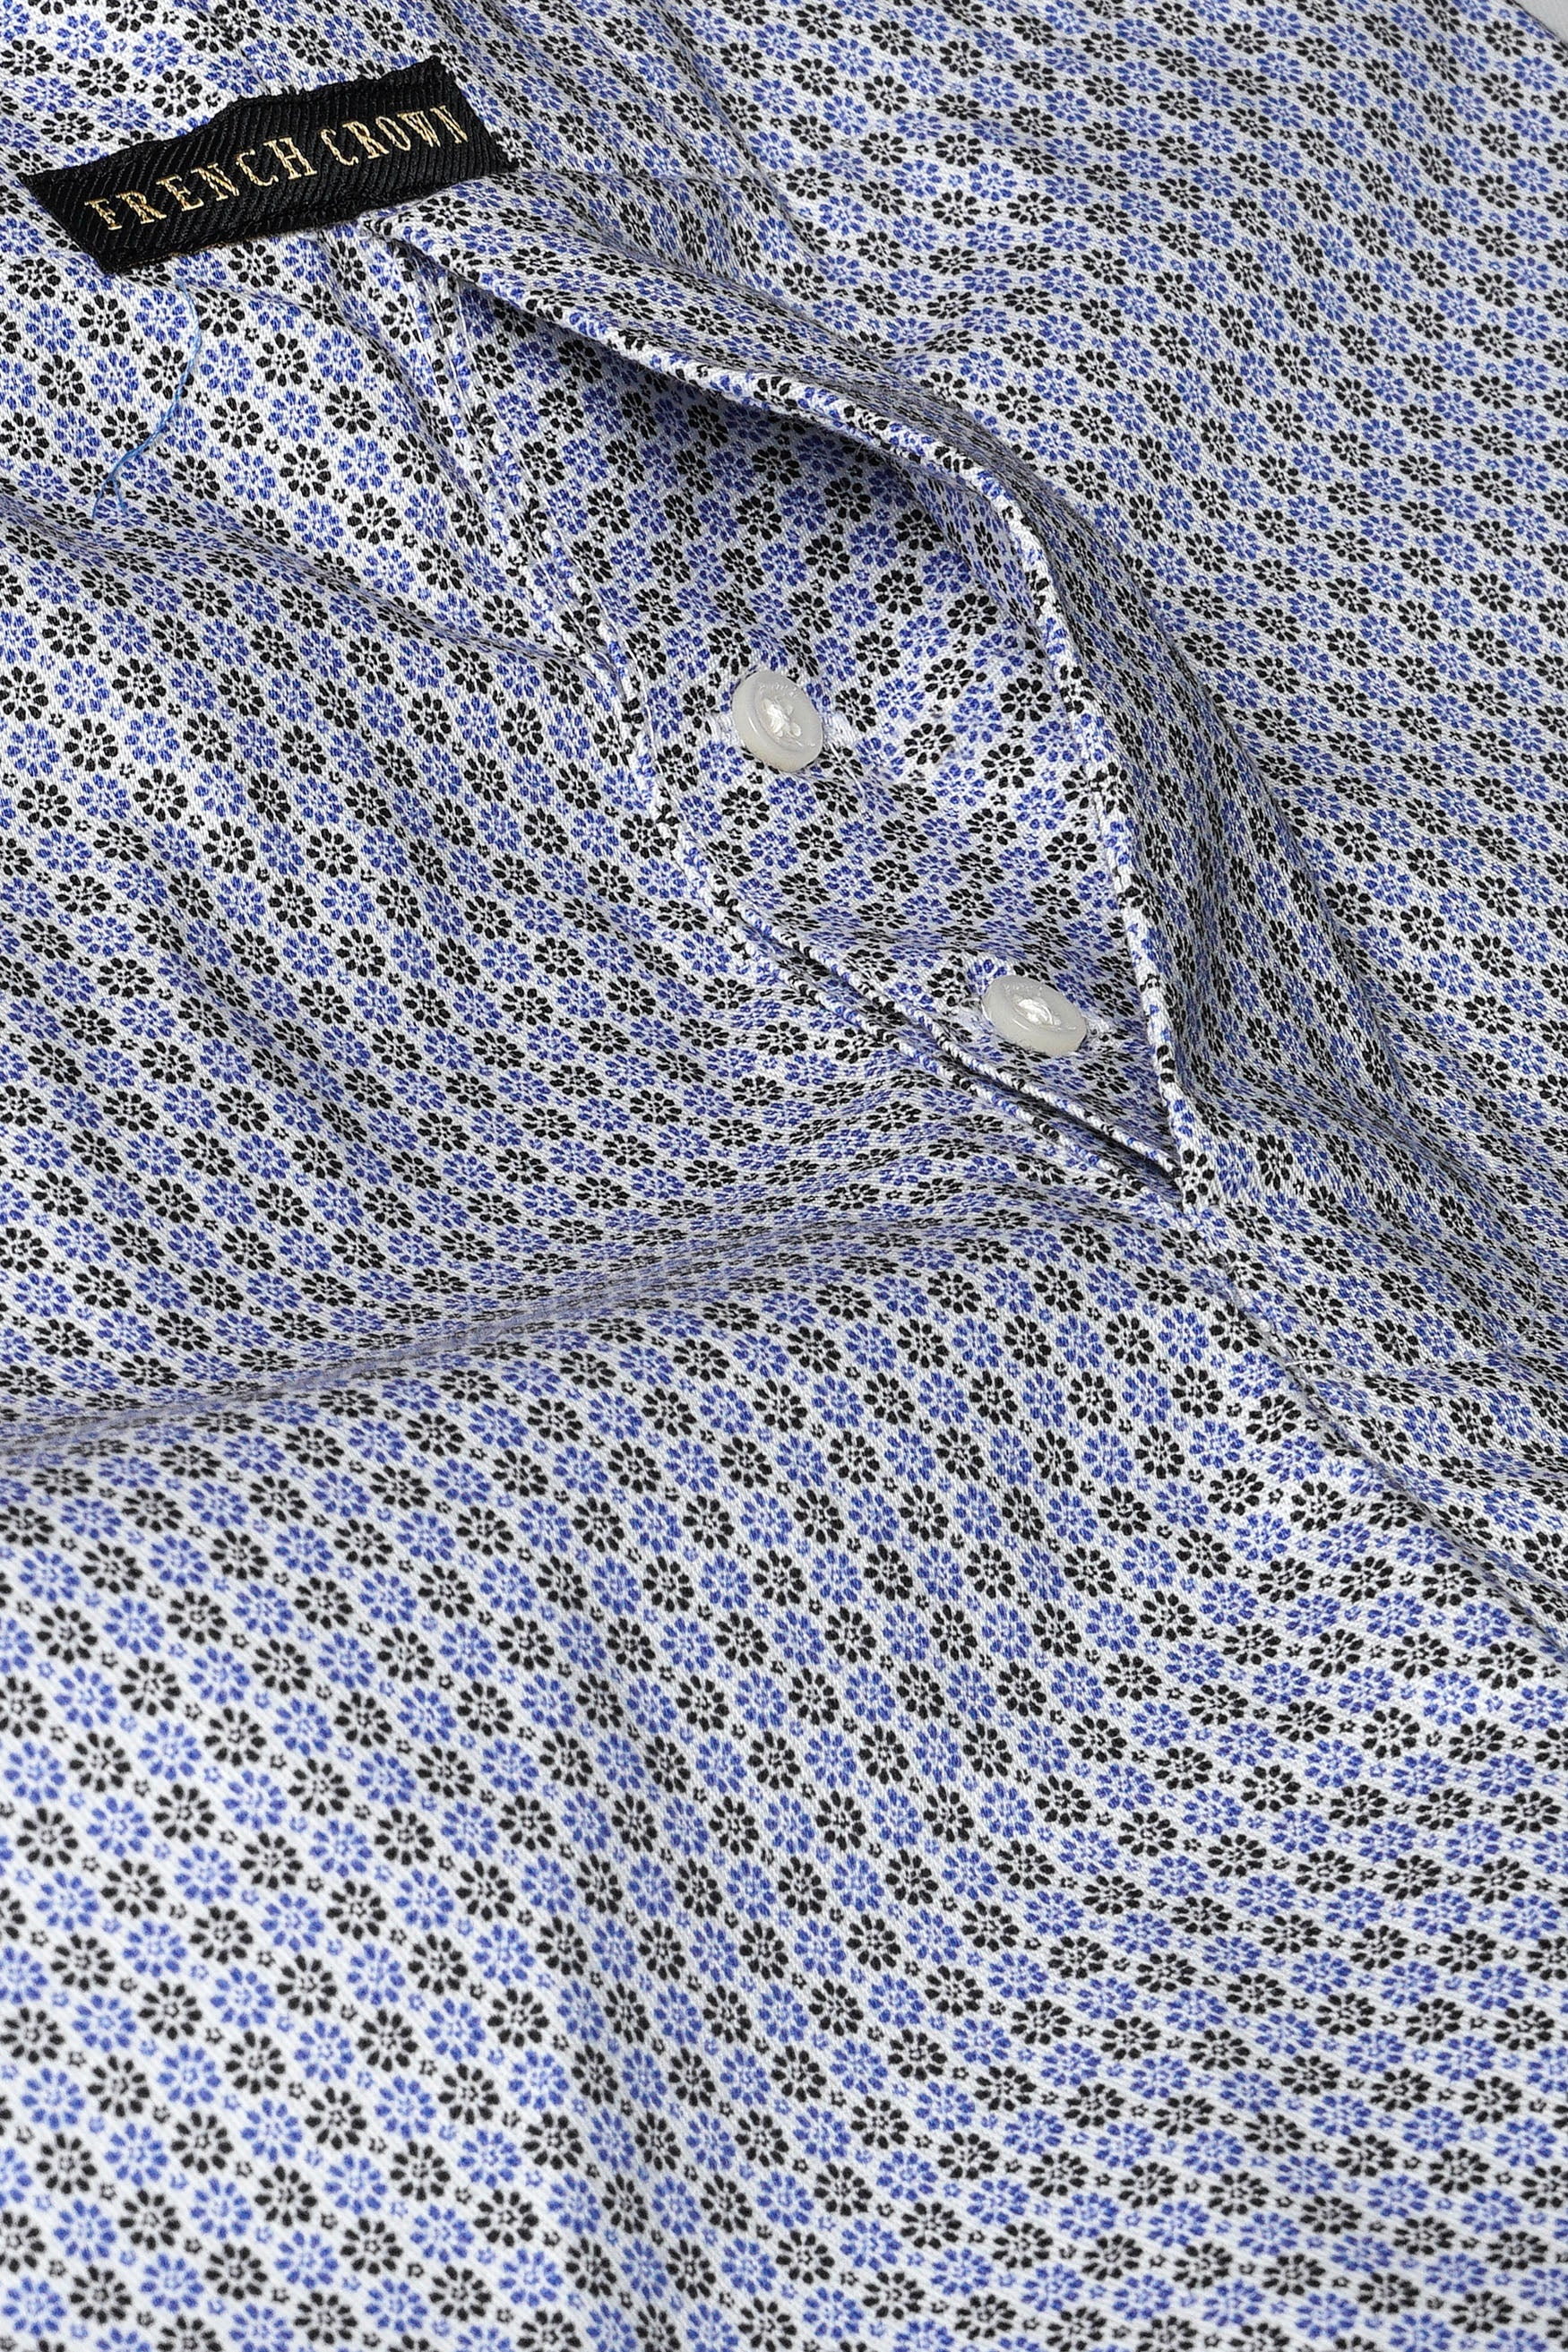 Deluge Blue and White Ditsy Printed Royal Oxford Boxer